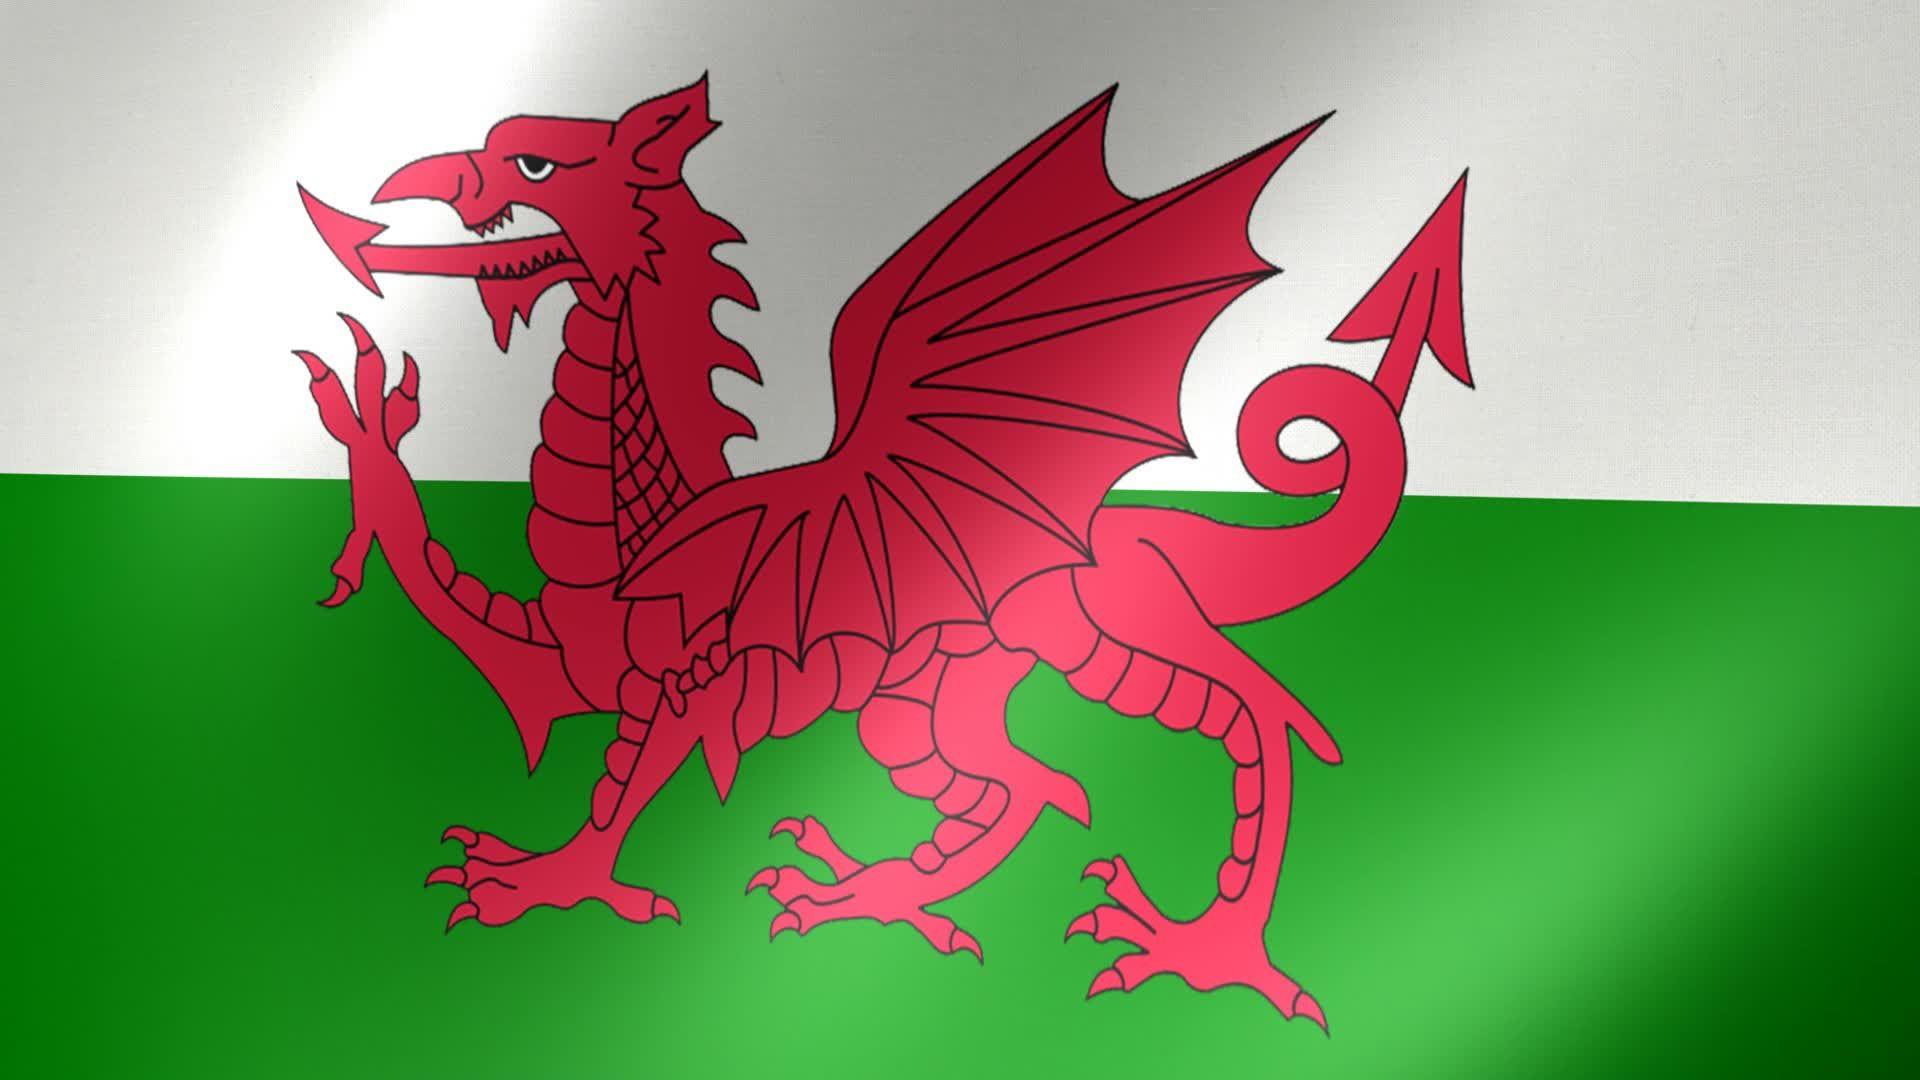 Flag Of Wales wallpaper, Misc, HQ Flag Of Wales pictureK